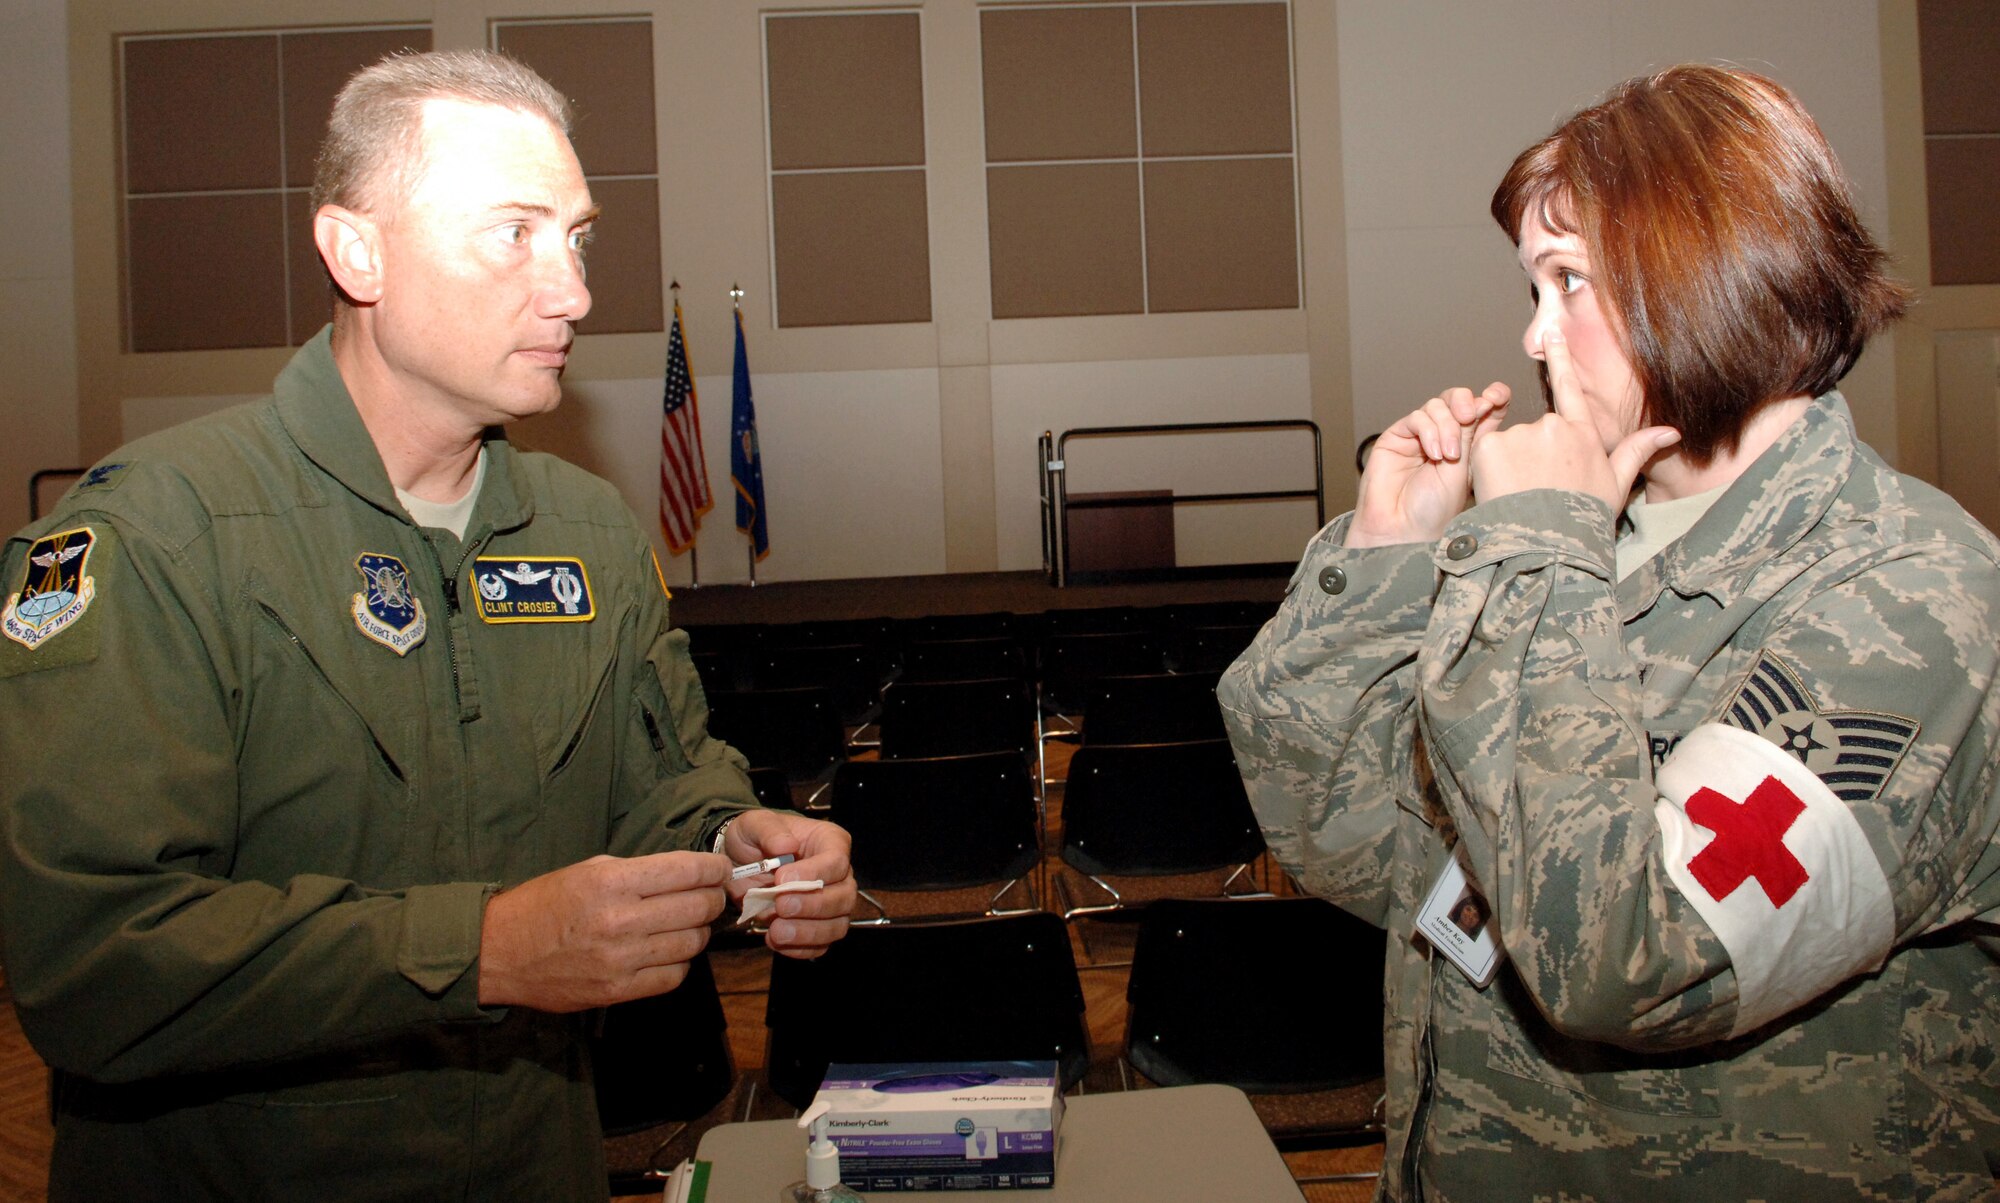 BUCKLEY AIR FORCE BASE, Colo. -- Tech. Sgt. Amber Kay, 460th Medical Operations Squadron (right) explains to Col. Clint Crosier, 460th Space Wing commander, how to use the flu mist Sept. 10. All active-duty military must get their flu immunizations today by 3 p.m. or Monday at the Leadership Development Center. (U.S. Air Force photo by Tech. Sgt. Shirley Henderson)